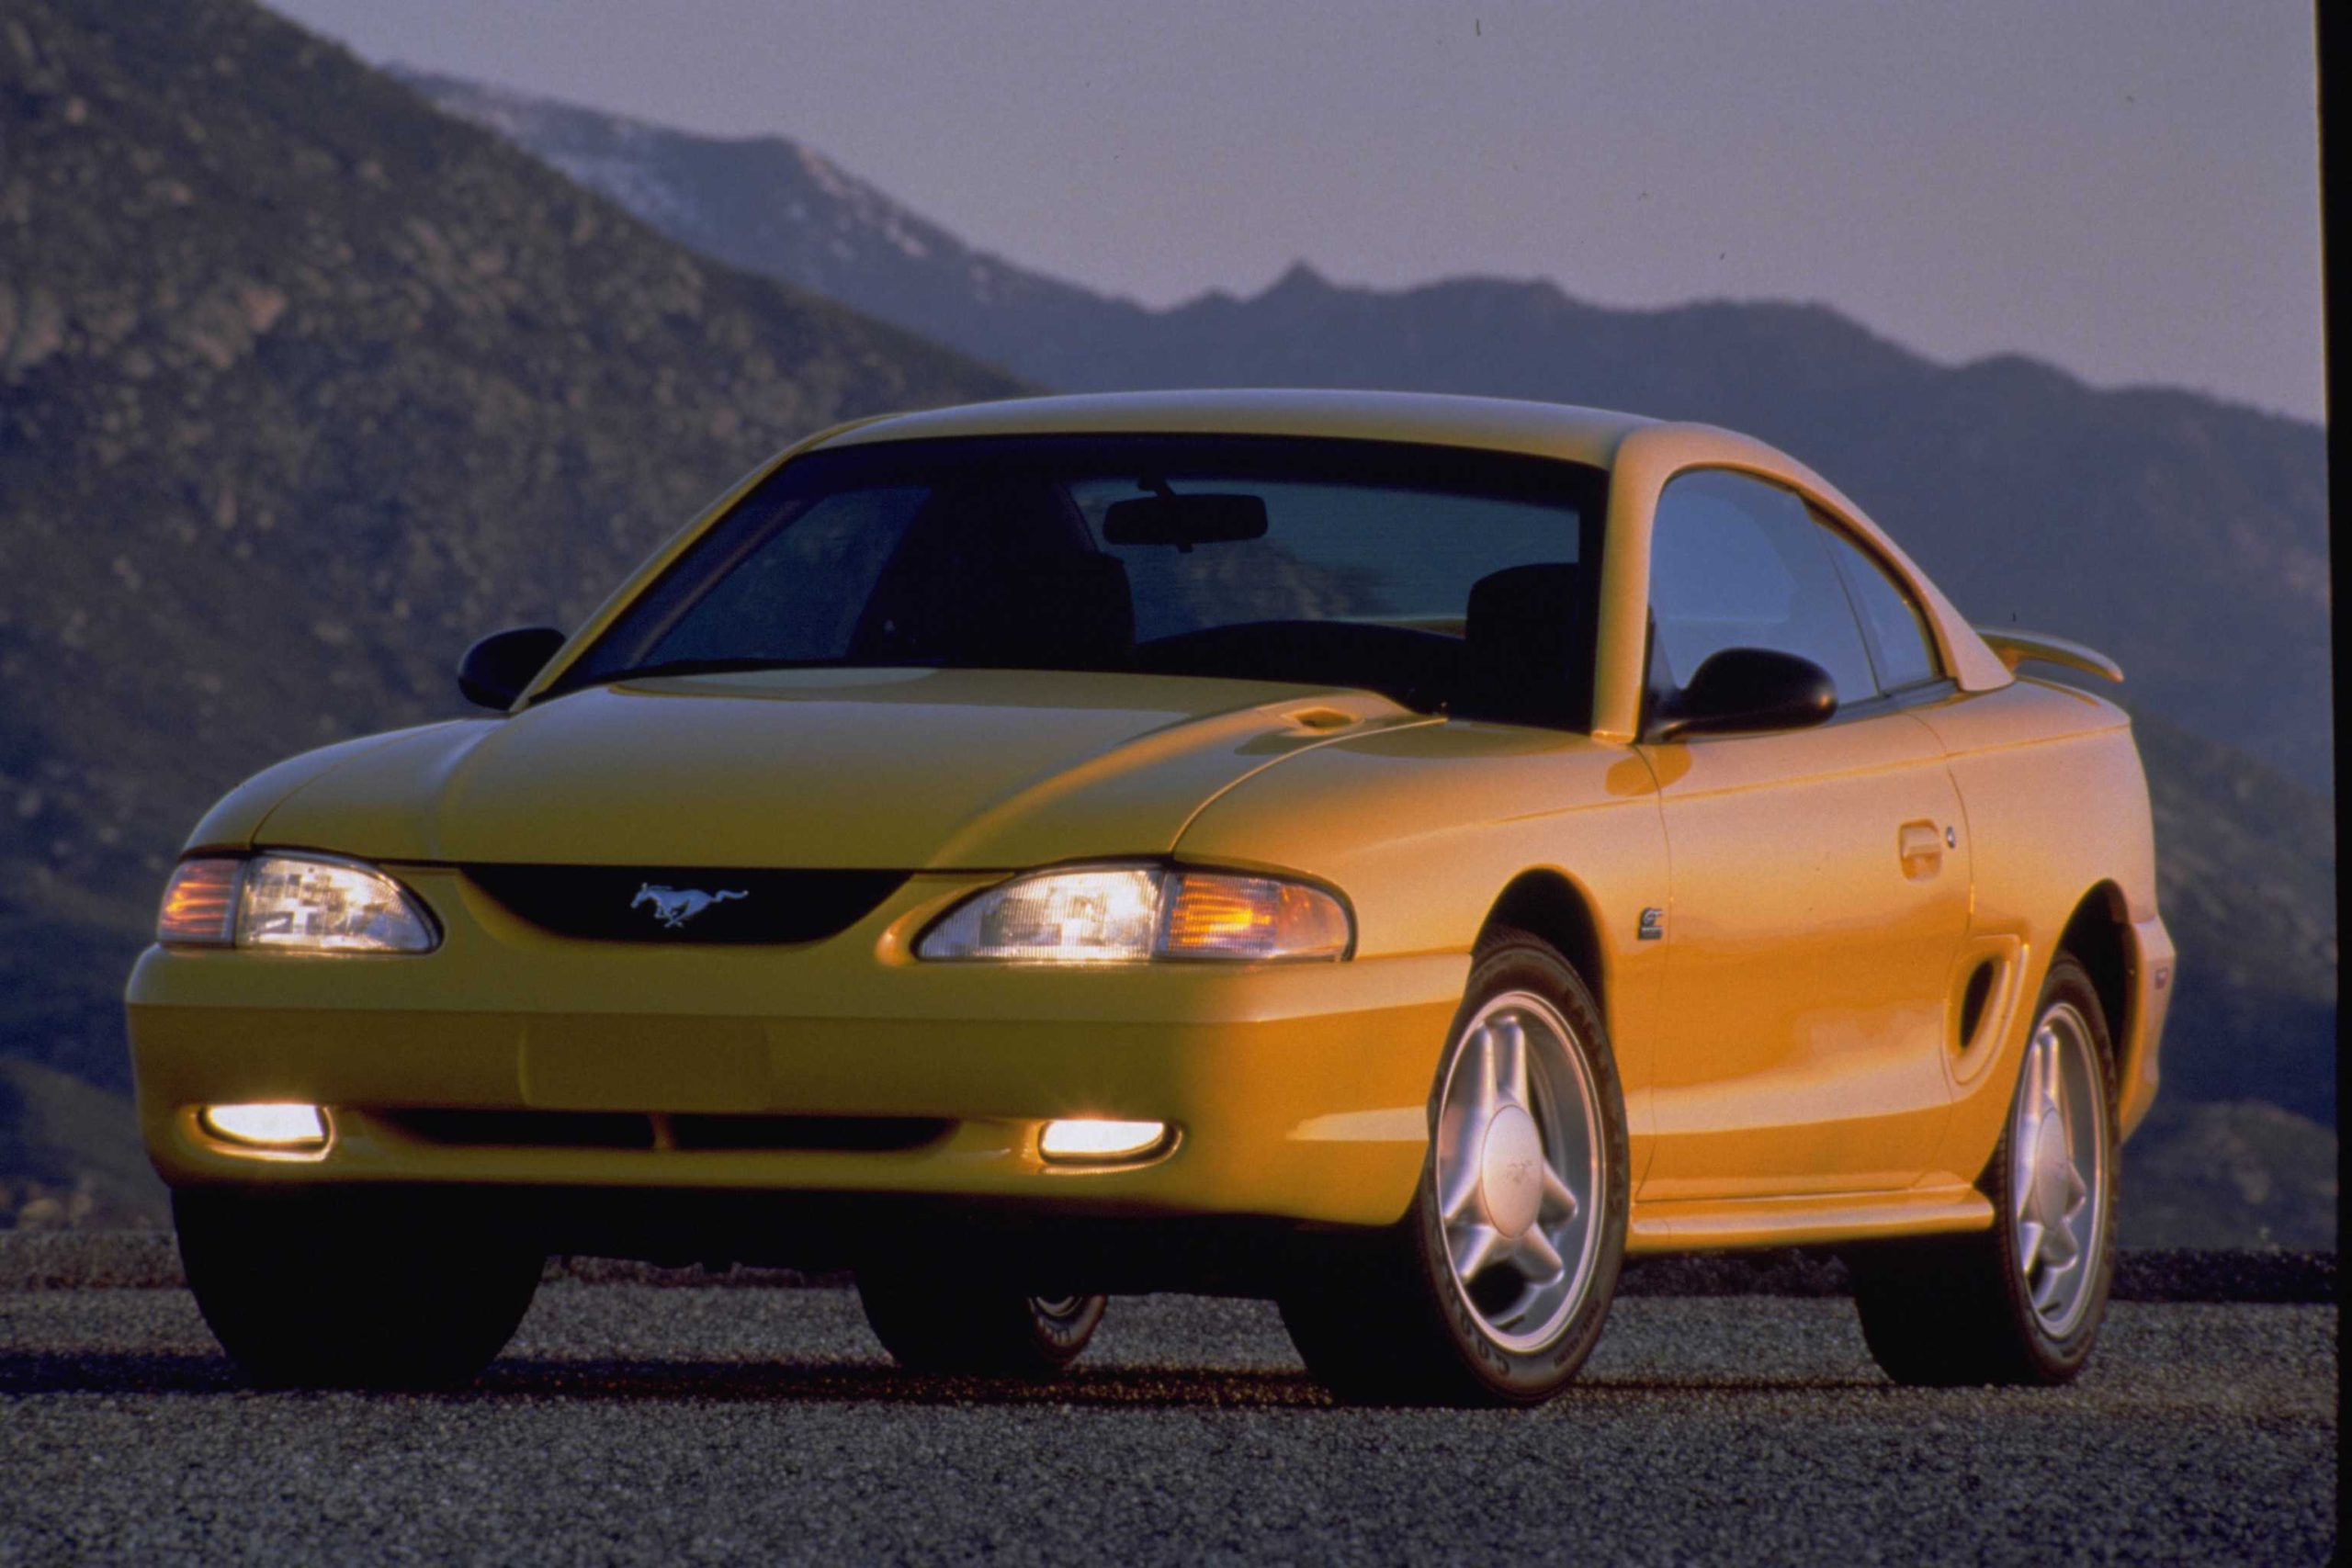 Ford Mustang Quiz: We Bet You Can’t Guess What Year These Happened!